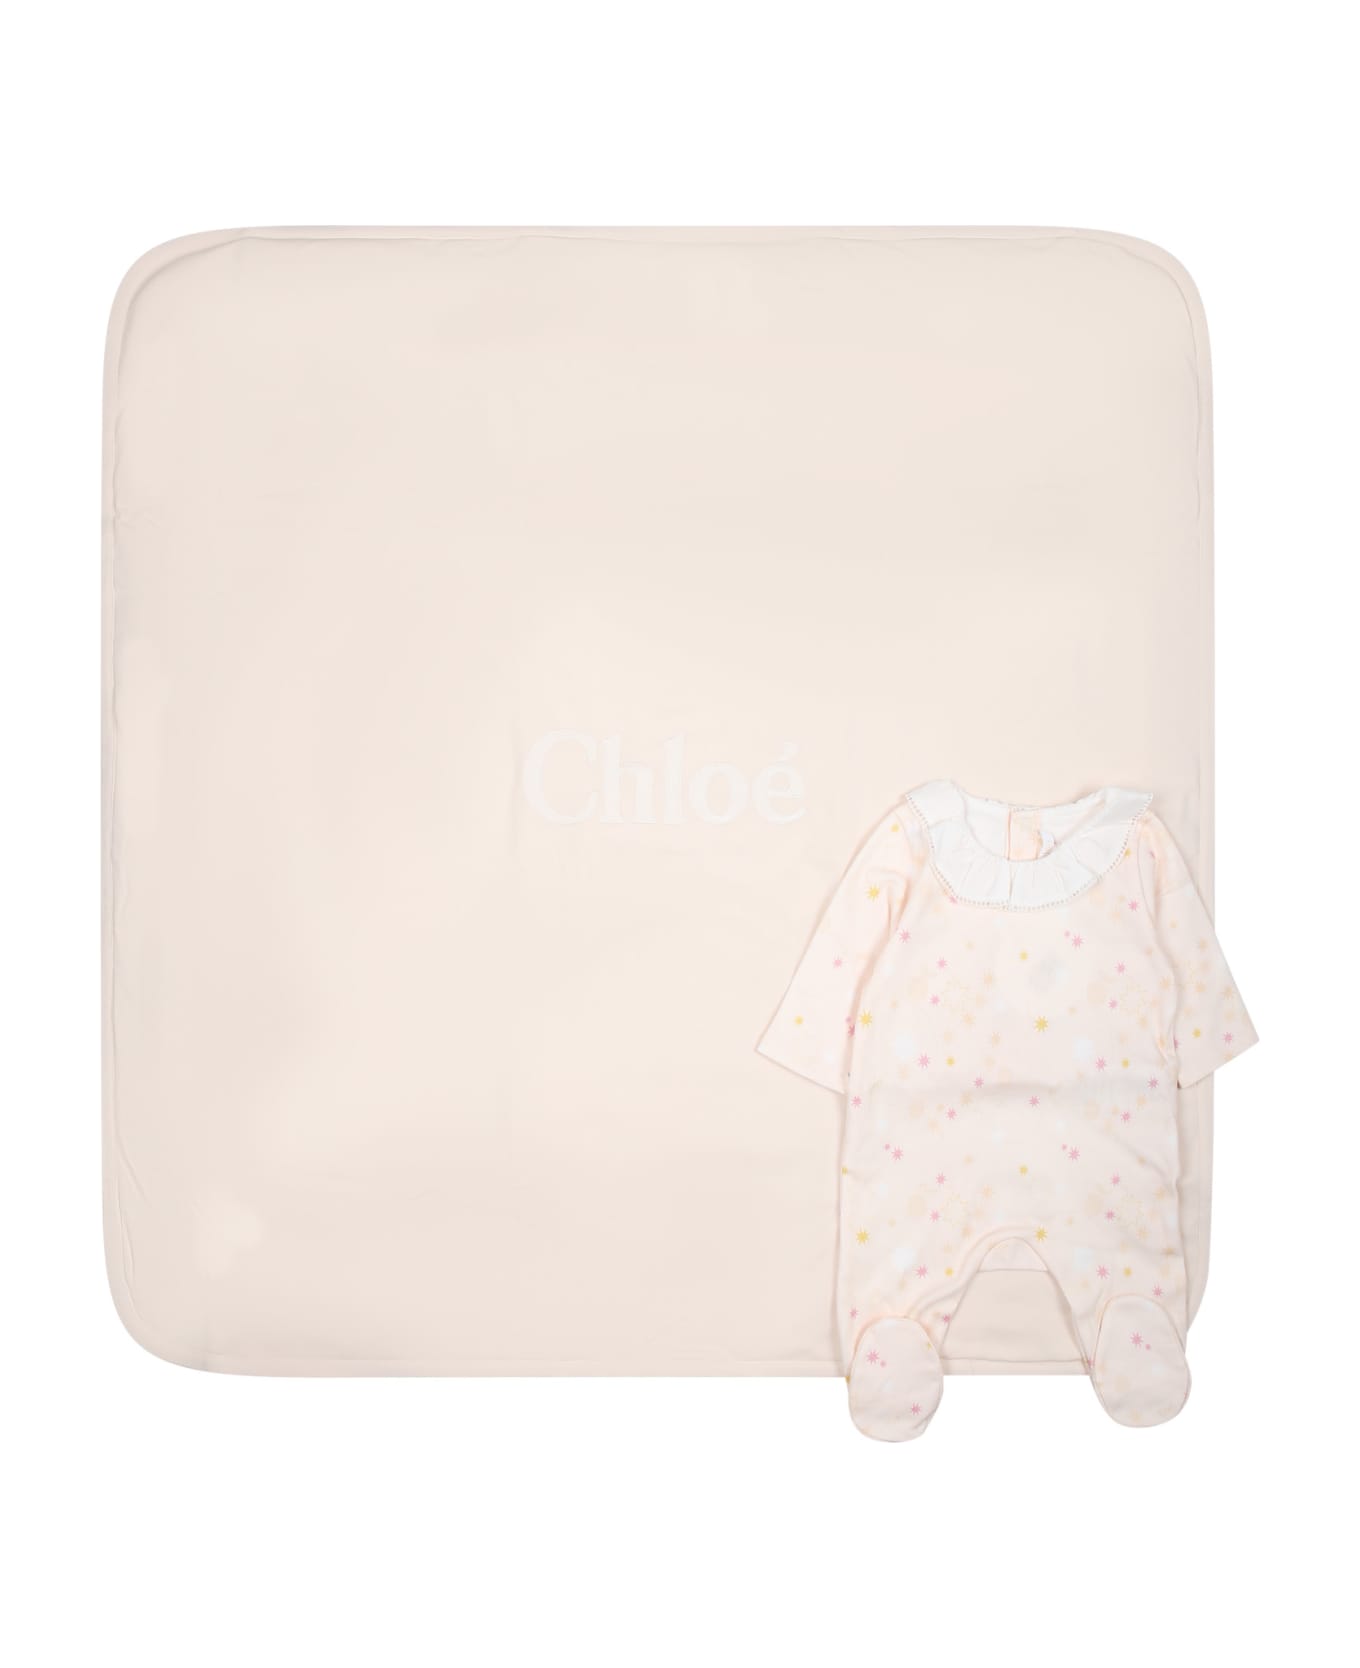 Chloé Pink Set For Baby Girl - Pink